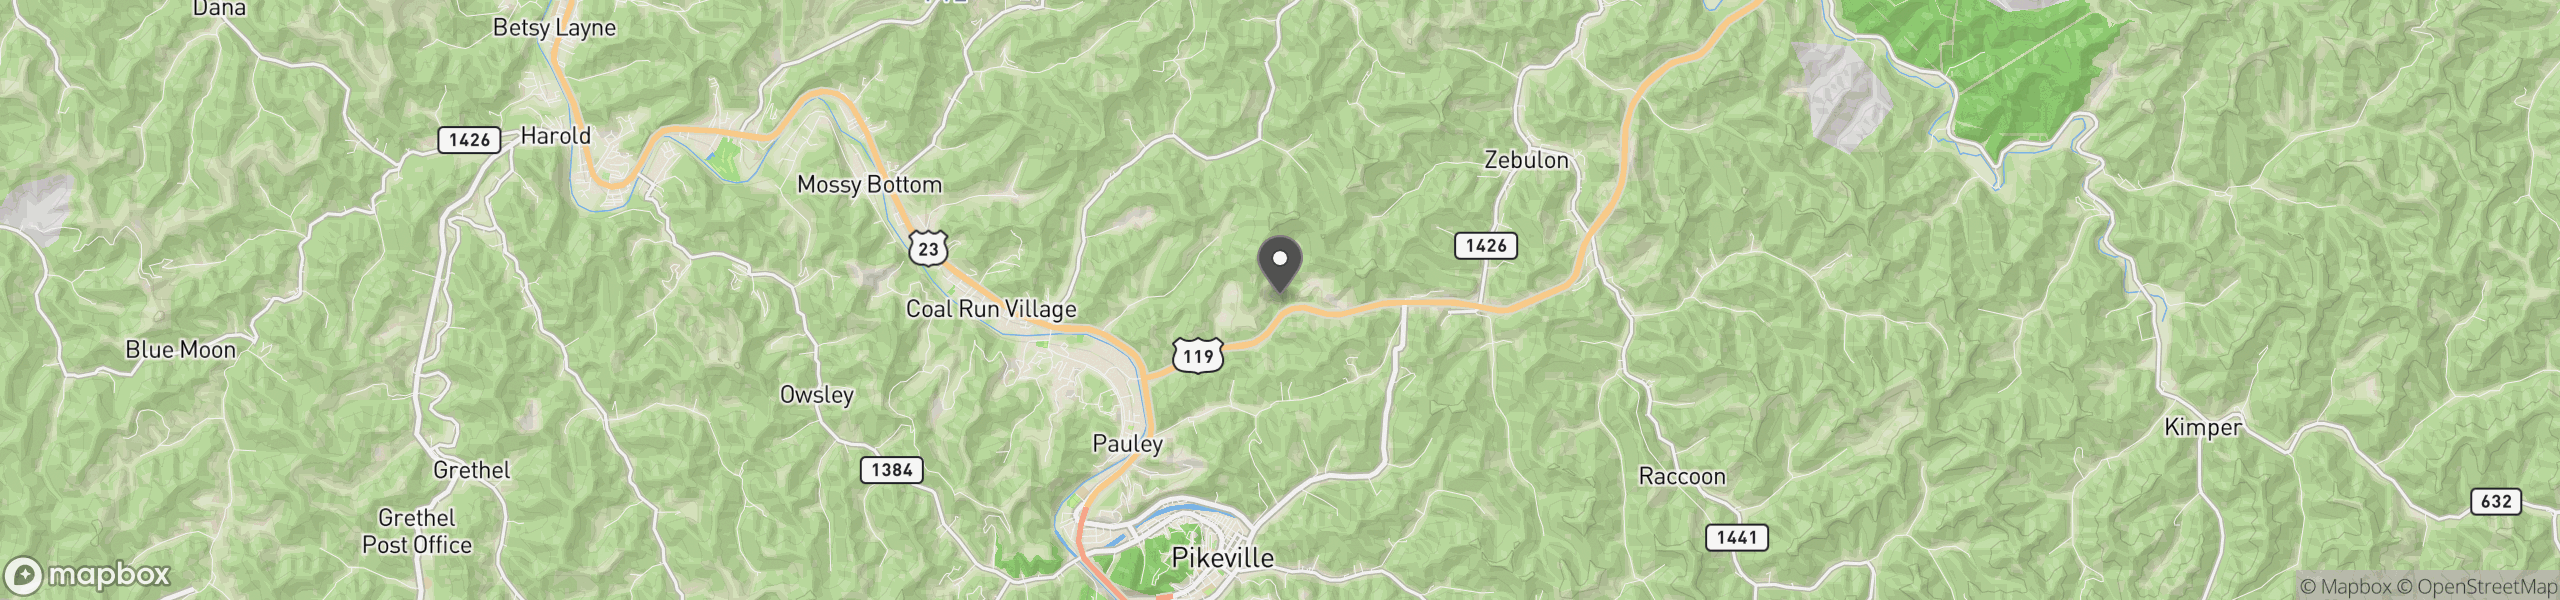 Pikeville, KY 41501